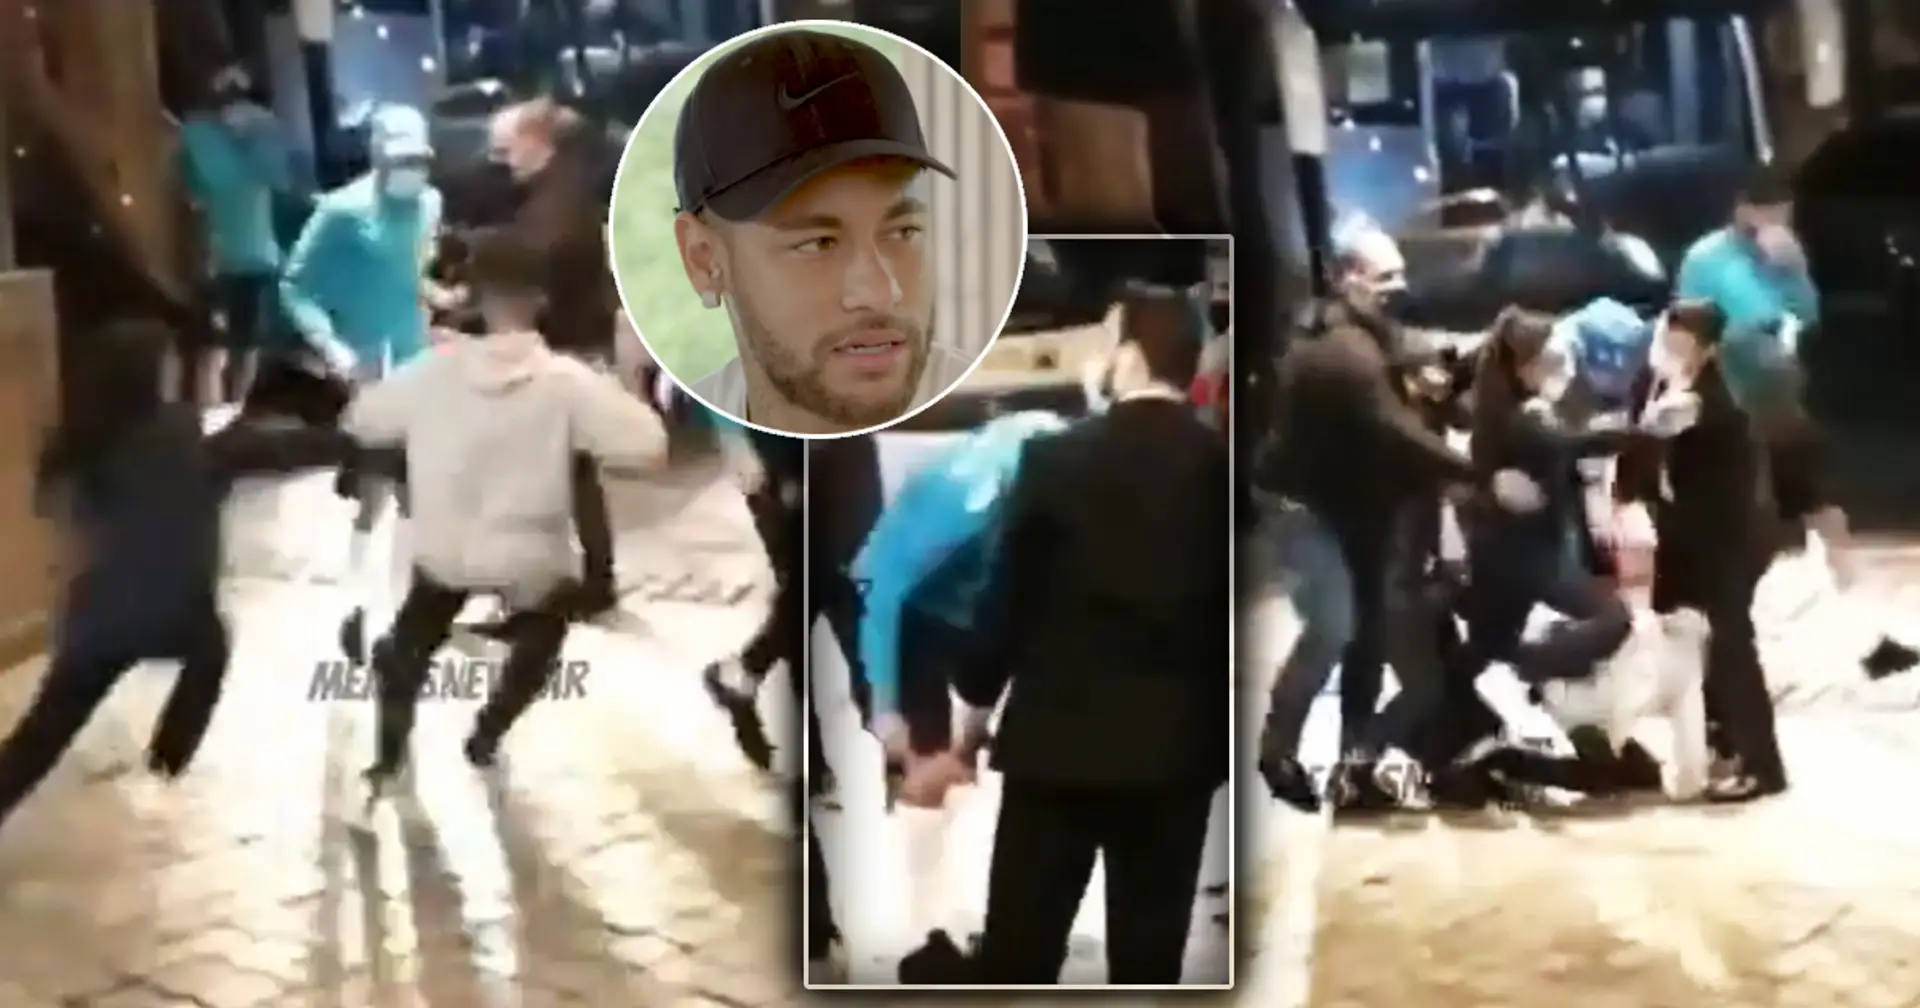 2 fans crashed into Neymar trying to take a pic – Ney hobbled after it